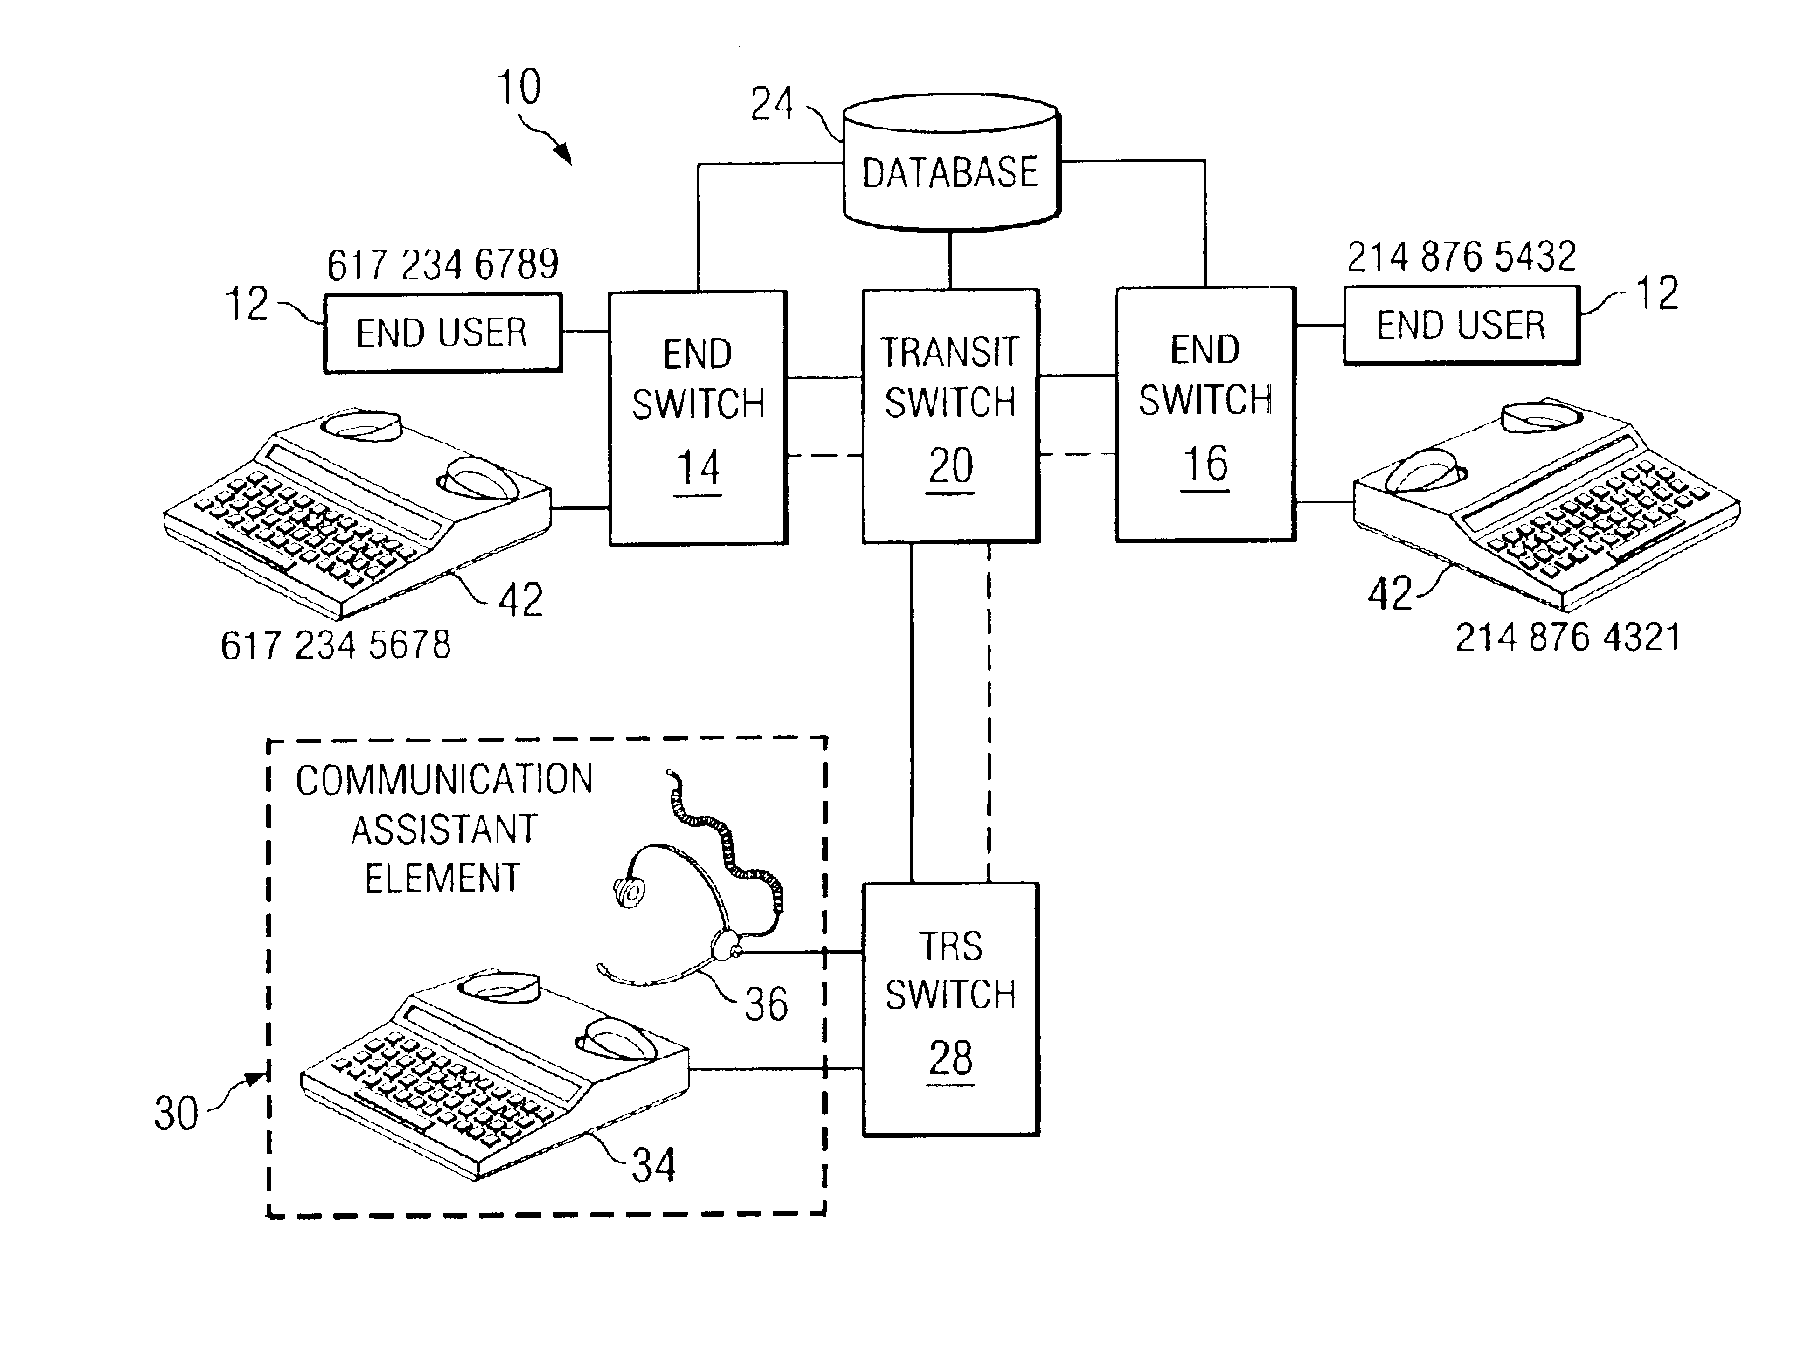 System and method for establishing automatic multipoint network connections in a communications environment